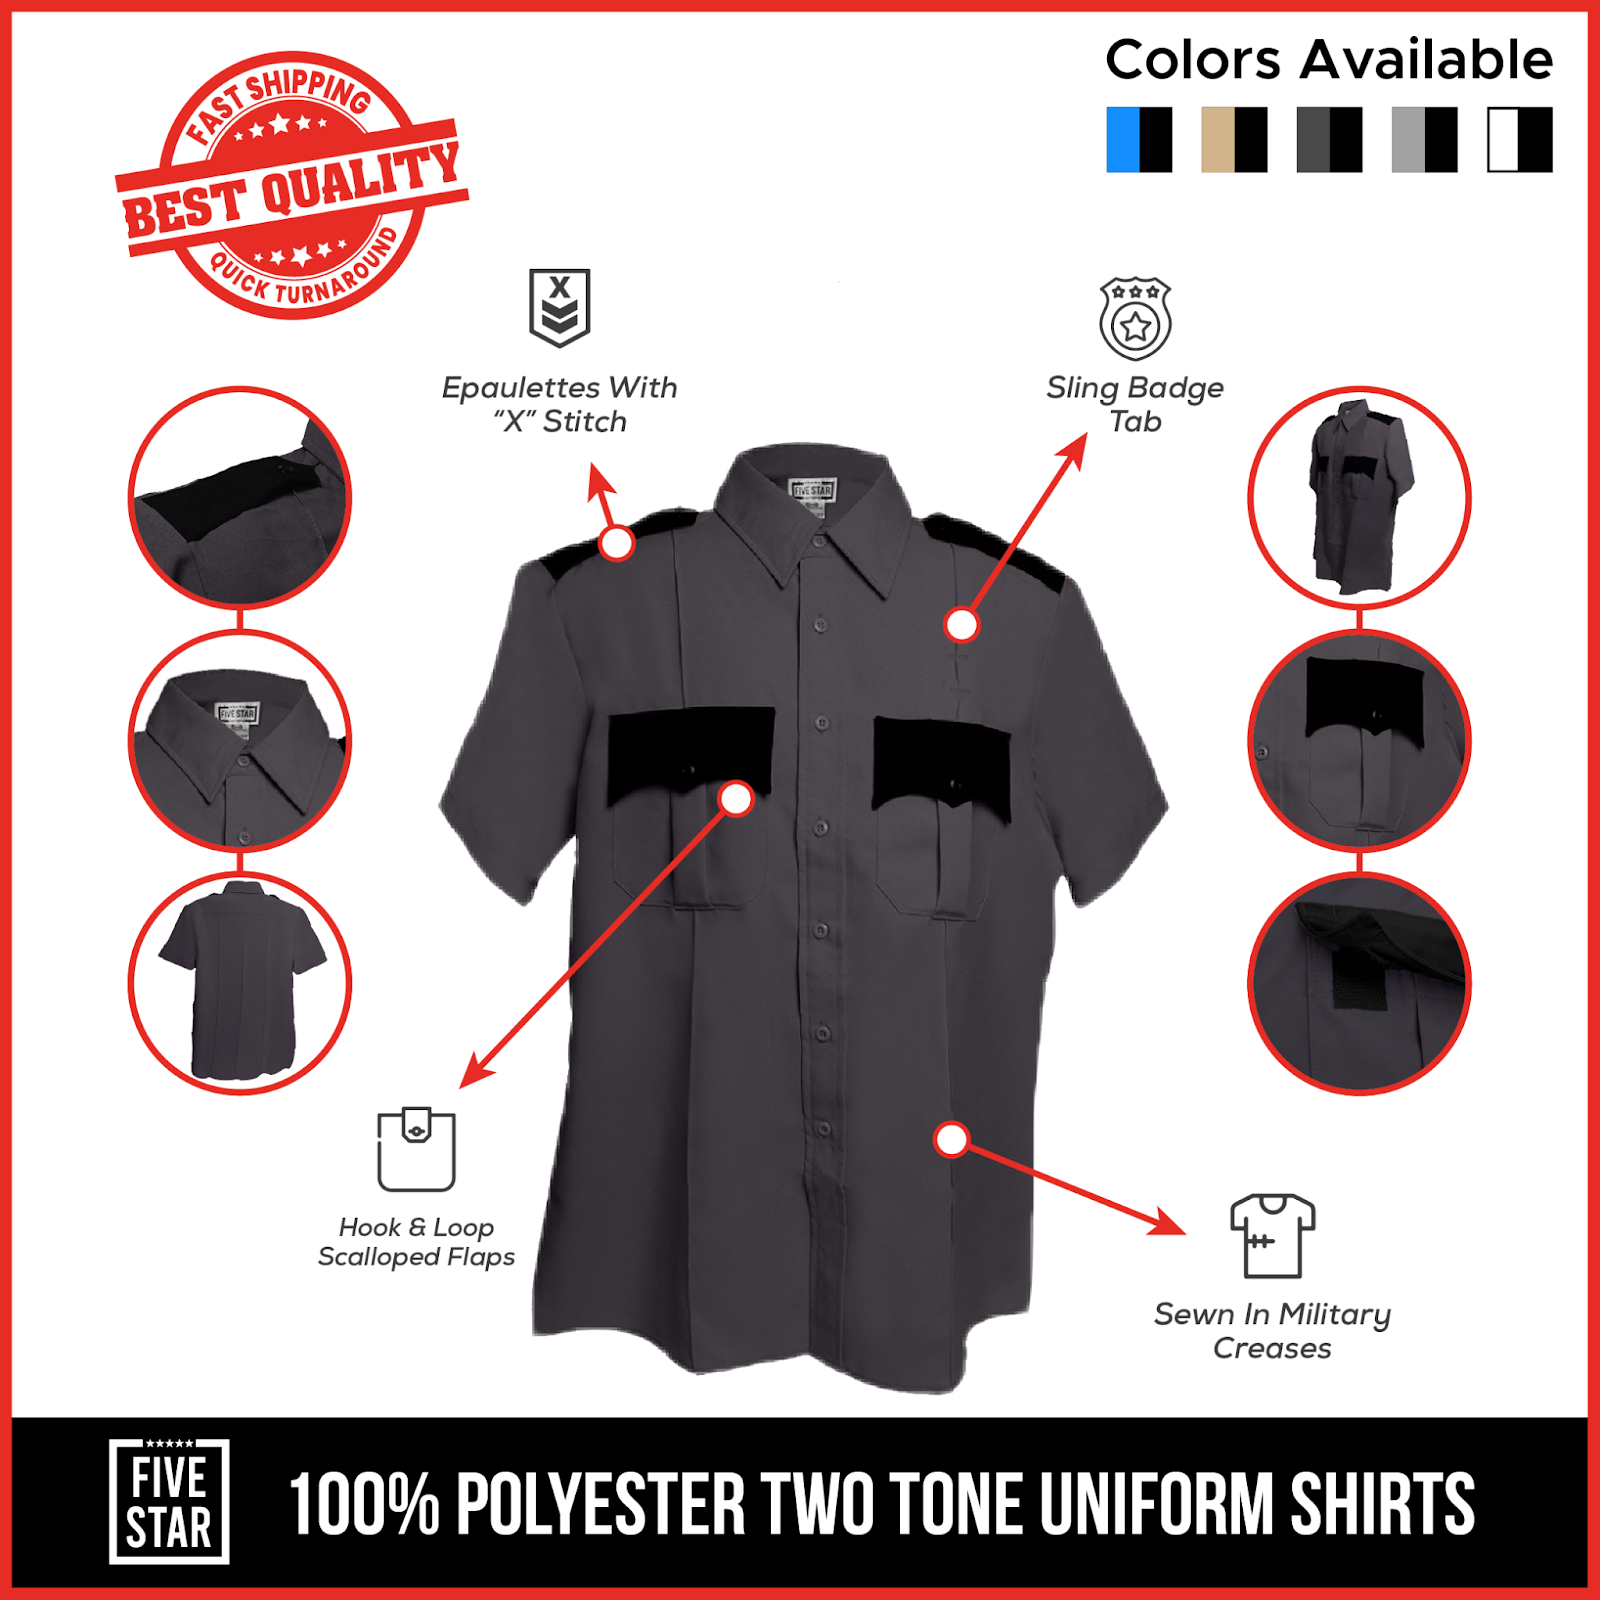 The benefits of custom security uniforms: 